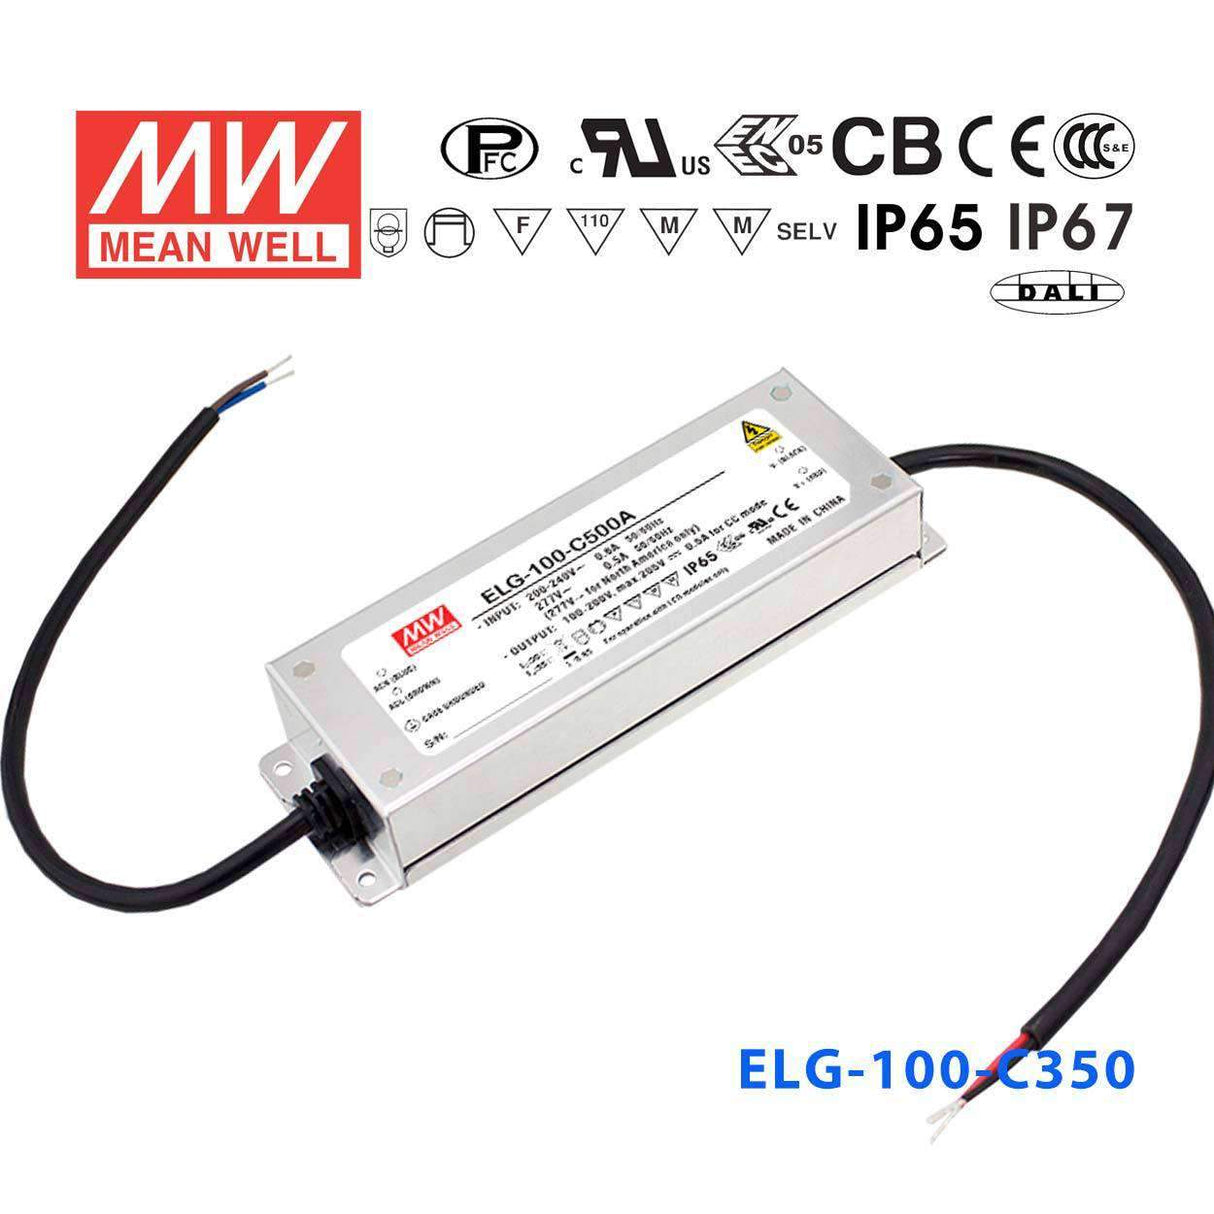 Mean Well ELG-100-C350 Power Supply 100W 350mA